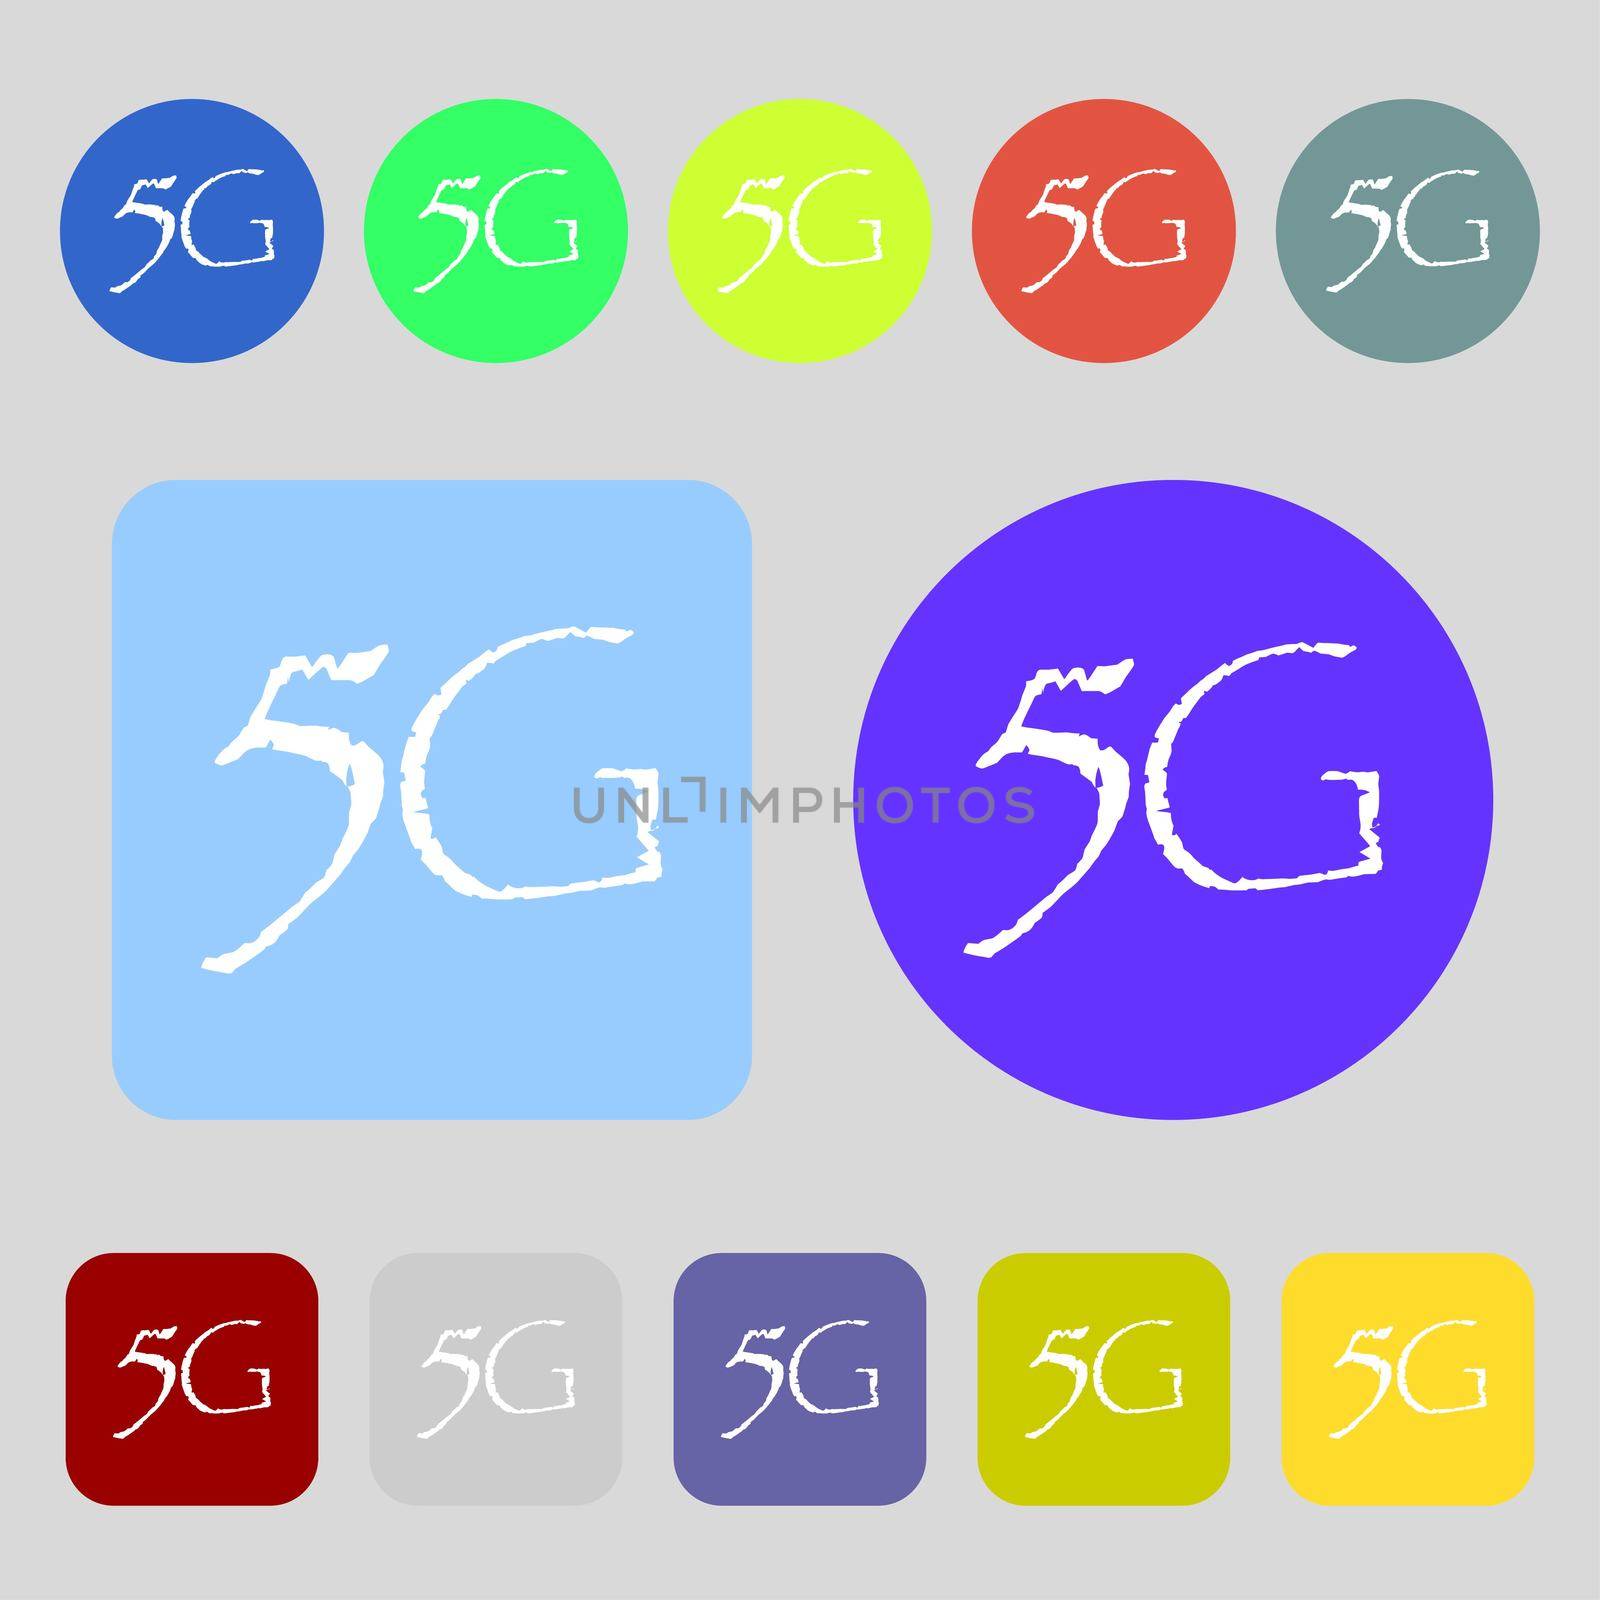 5G sign icon. Mobile telecommunications technology symbol.12 colored buttons. Flat design. illustration